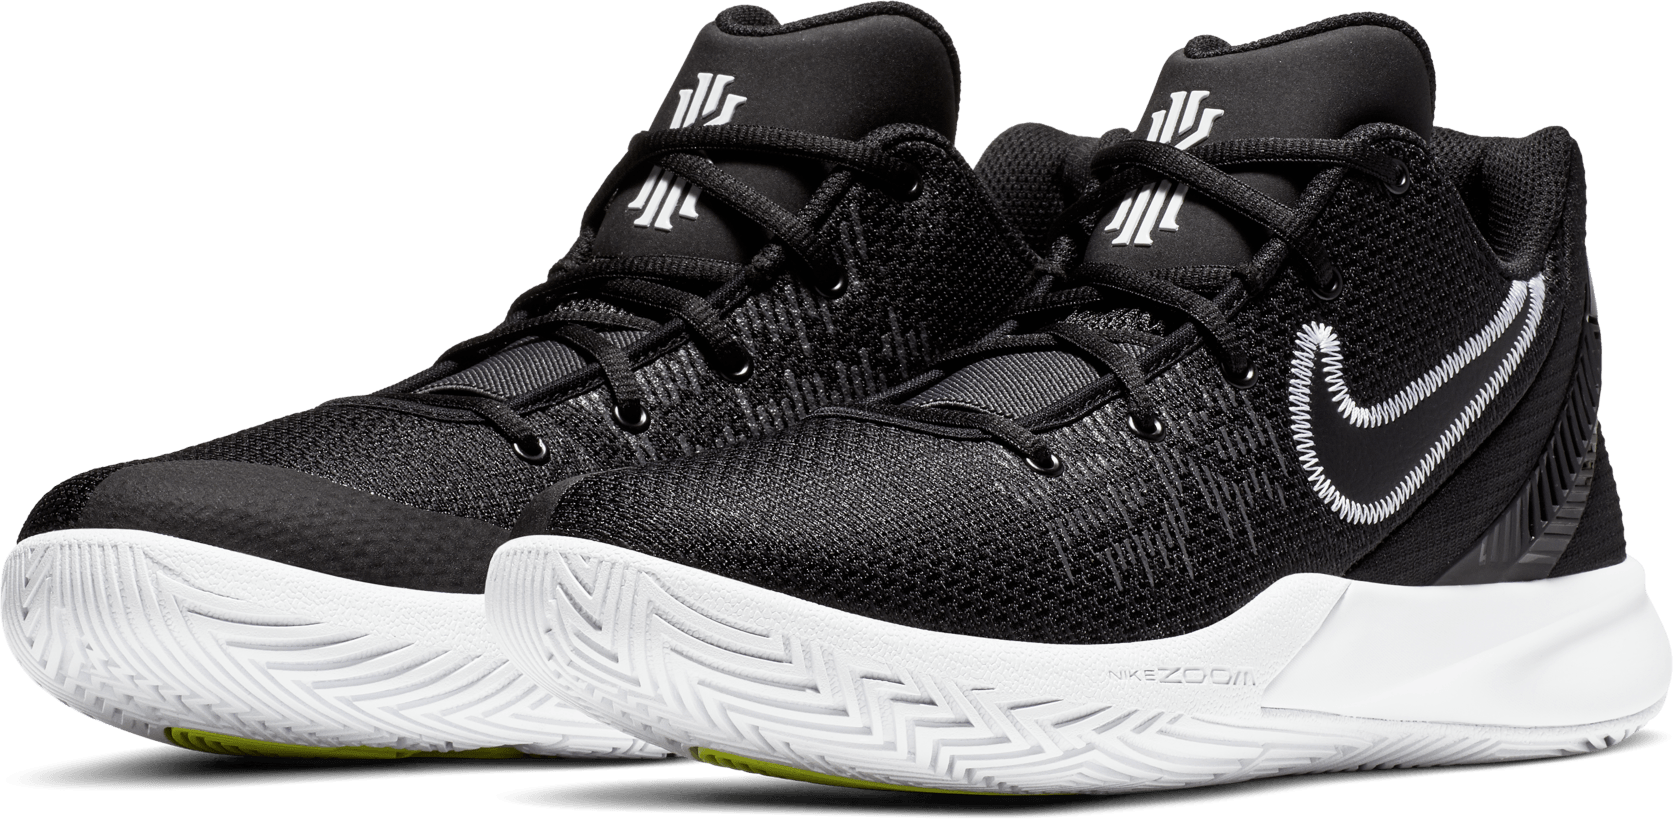 Nike Kyrie Flytrap 2 Performance Review